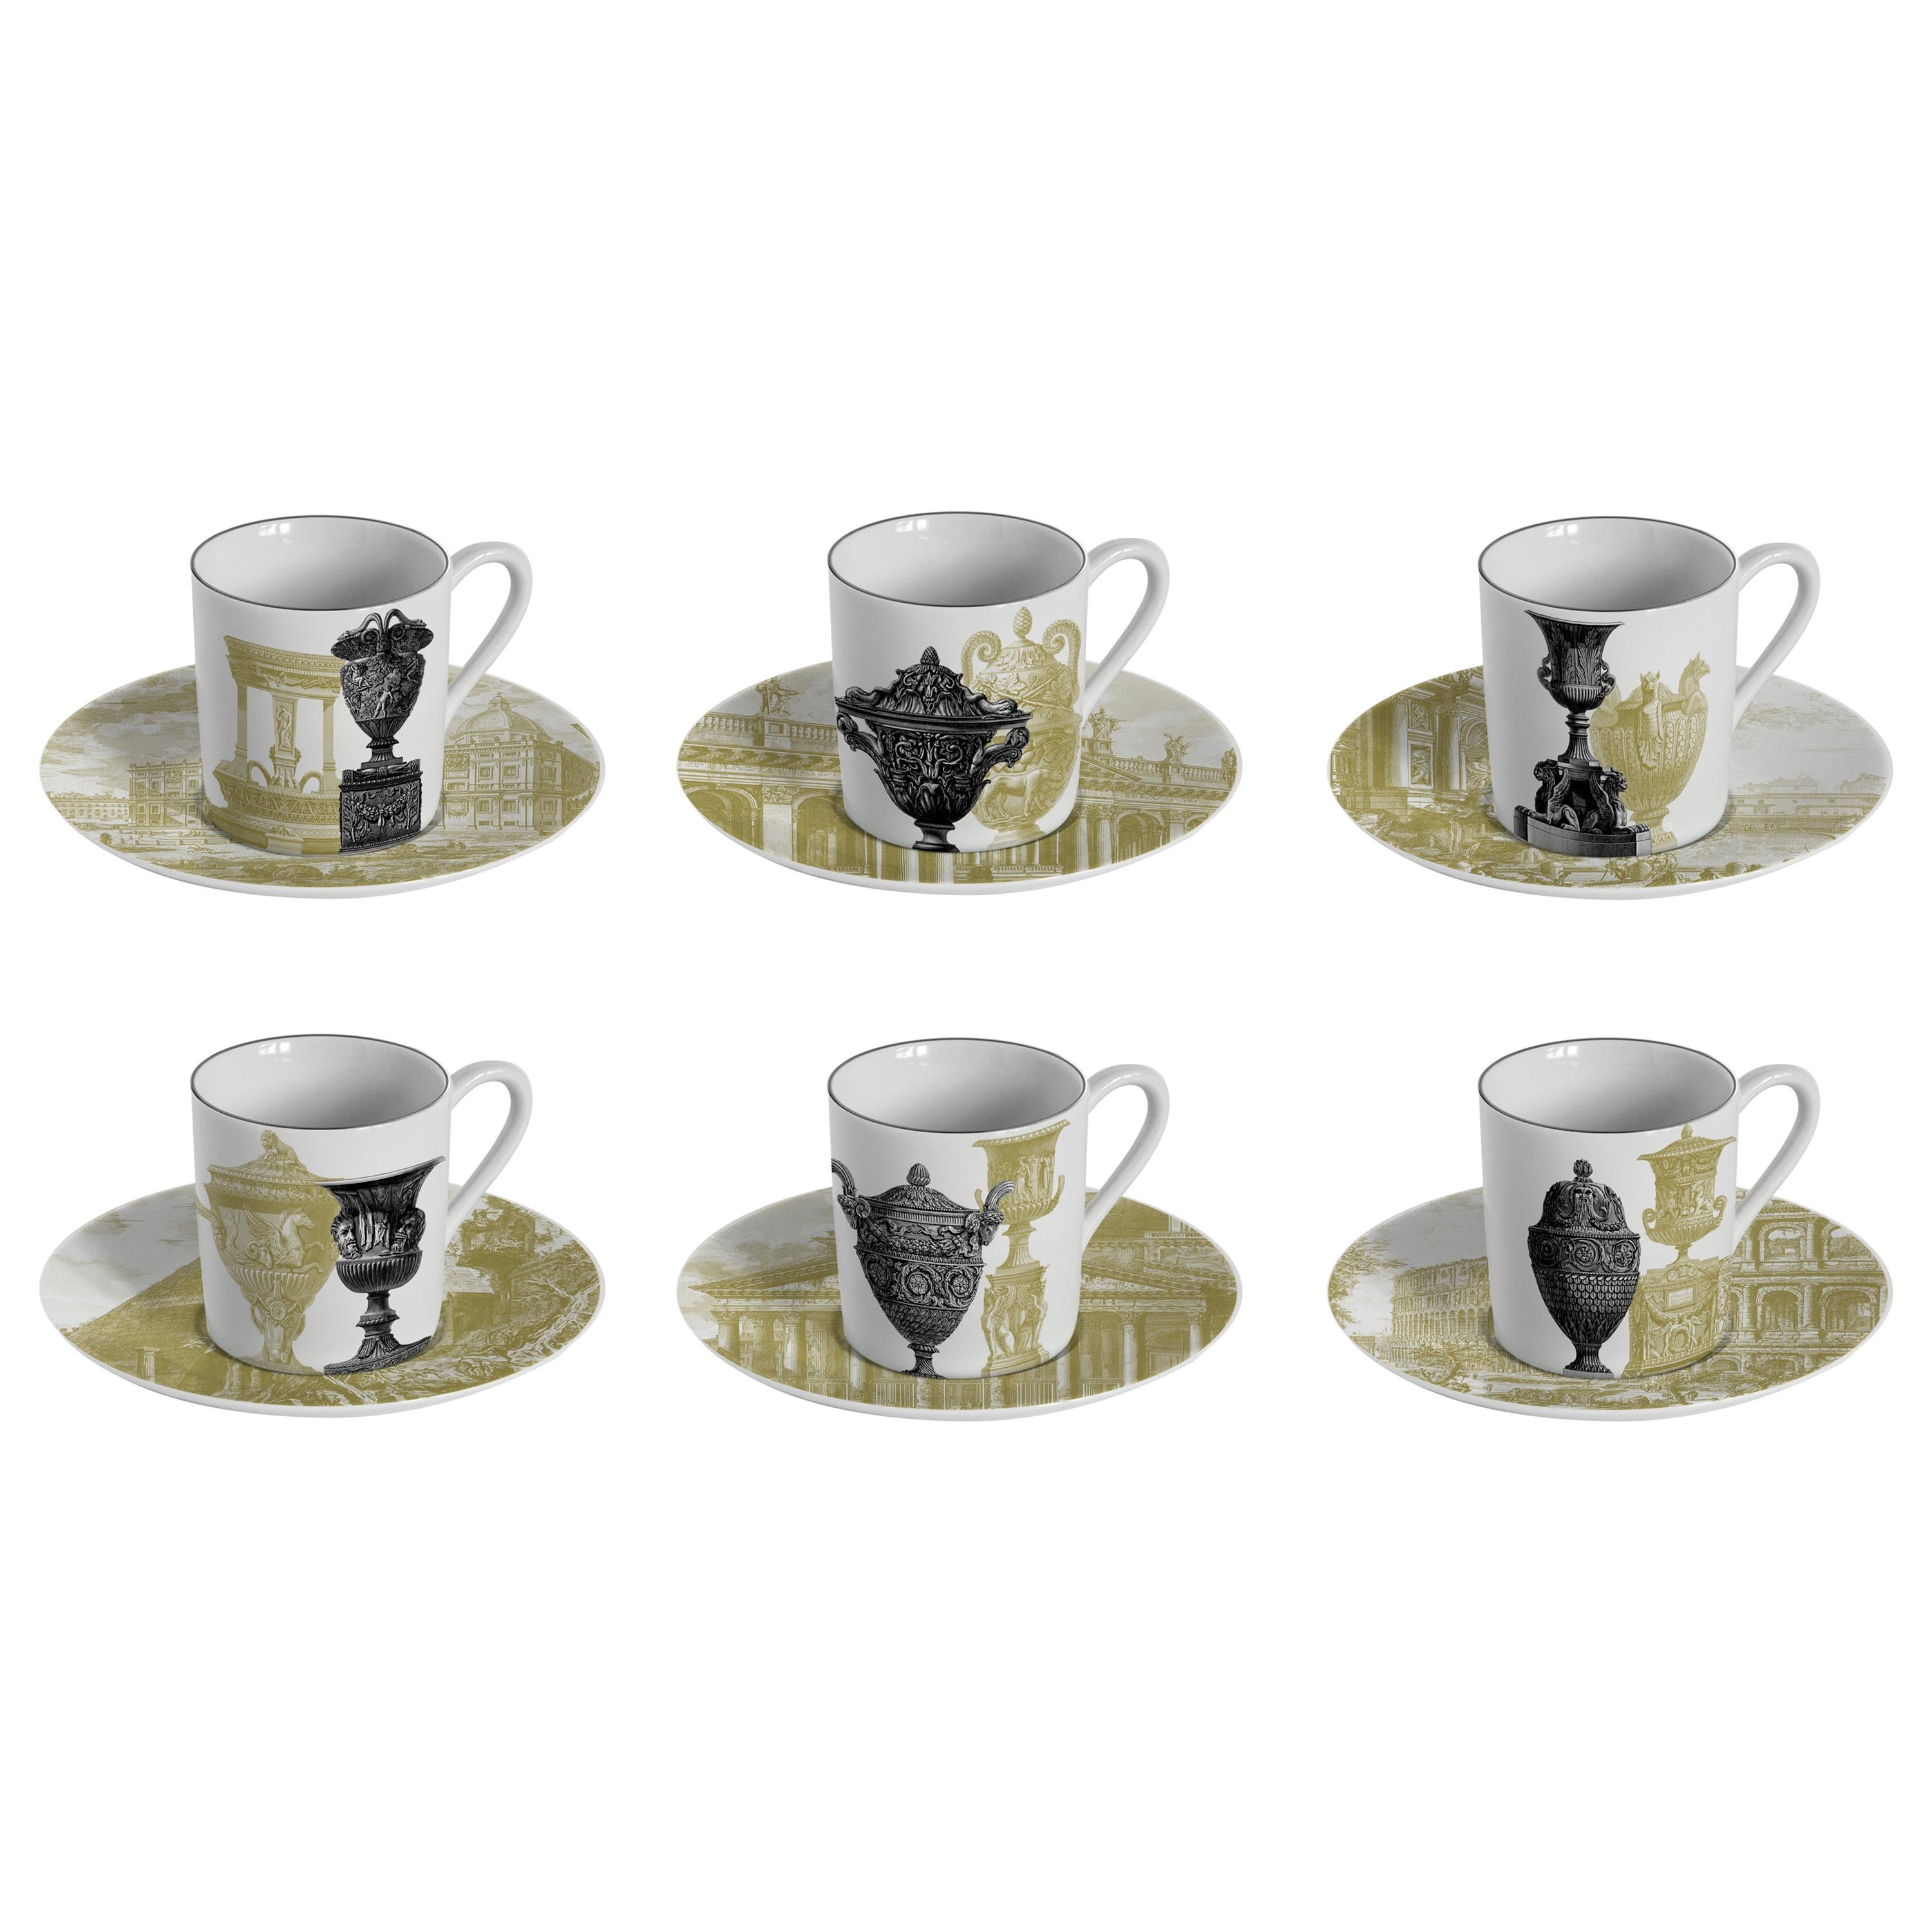 Roma, Coffee Set with Six Contemporary Porcelains with Decorative Design